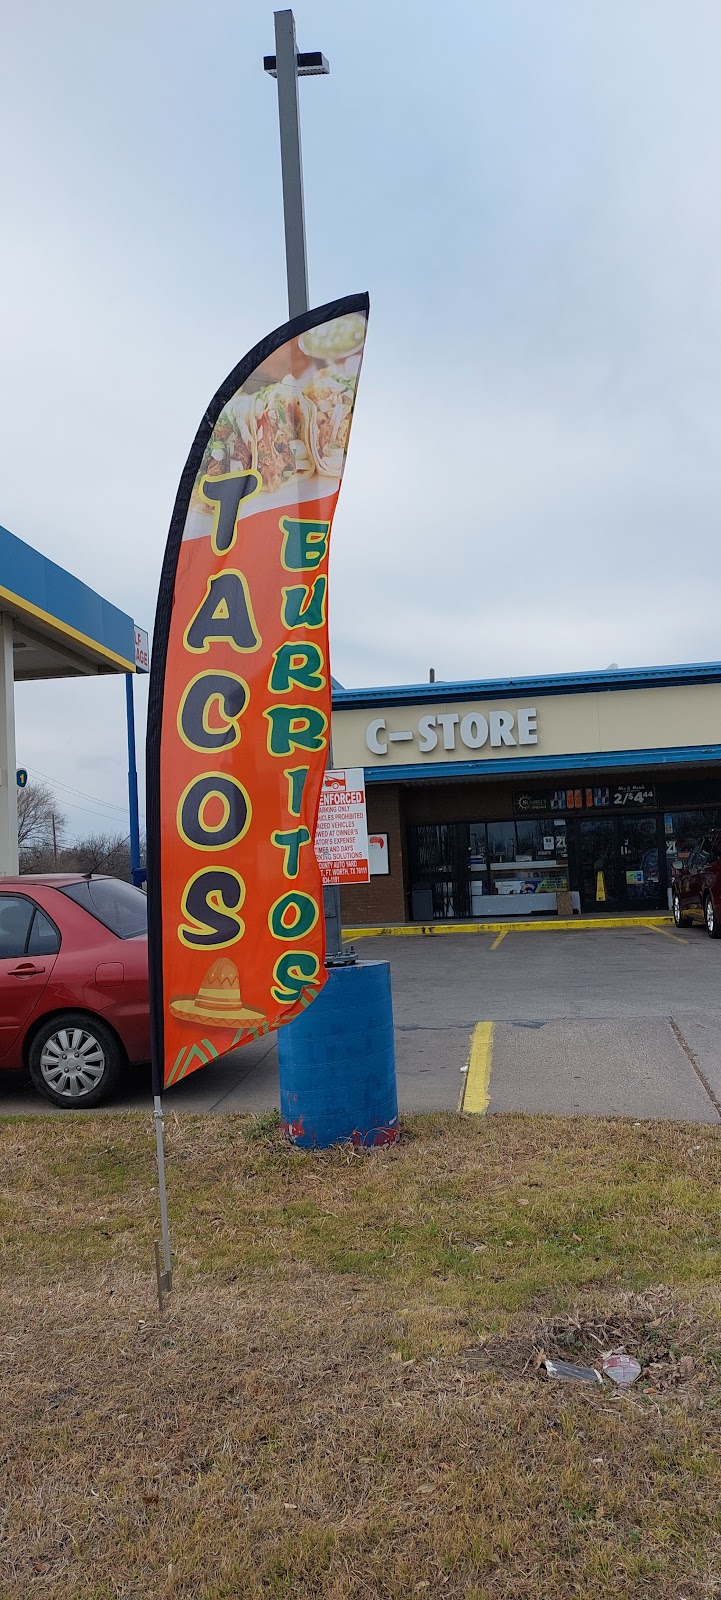 C Store- The Mexican Grill | 3201 N Beach St, Fort Worth, TX 76111 | Phone: (817) 831-6300